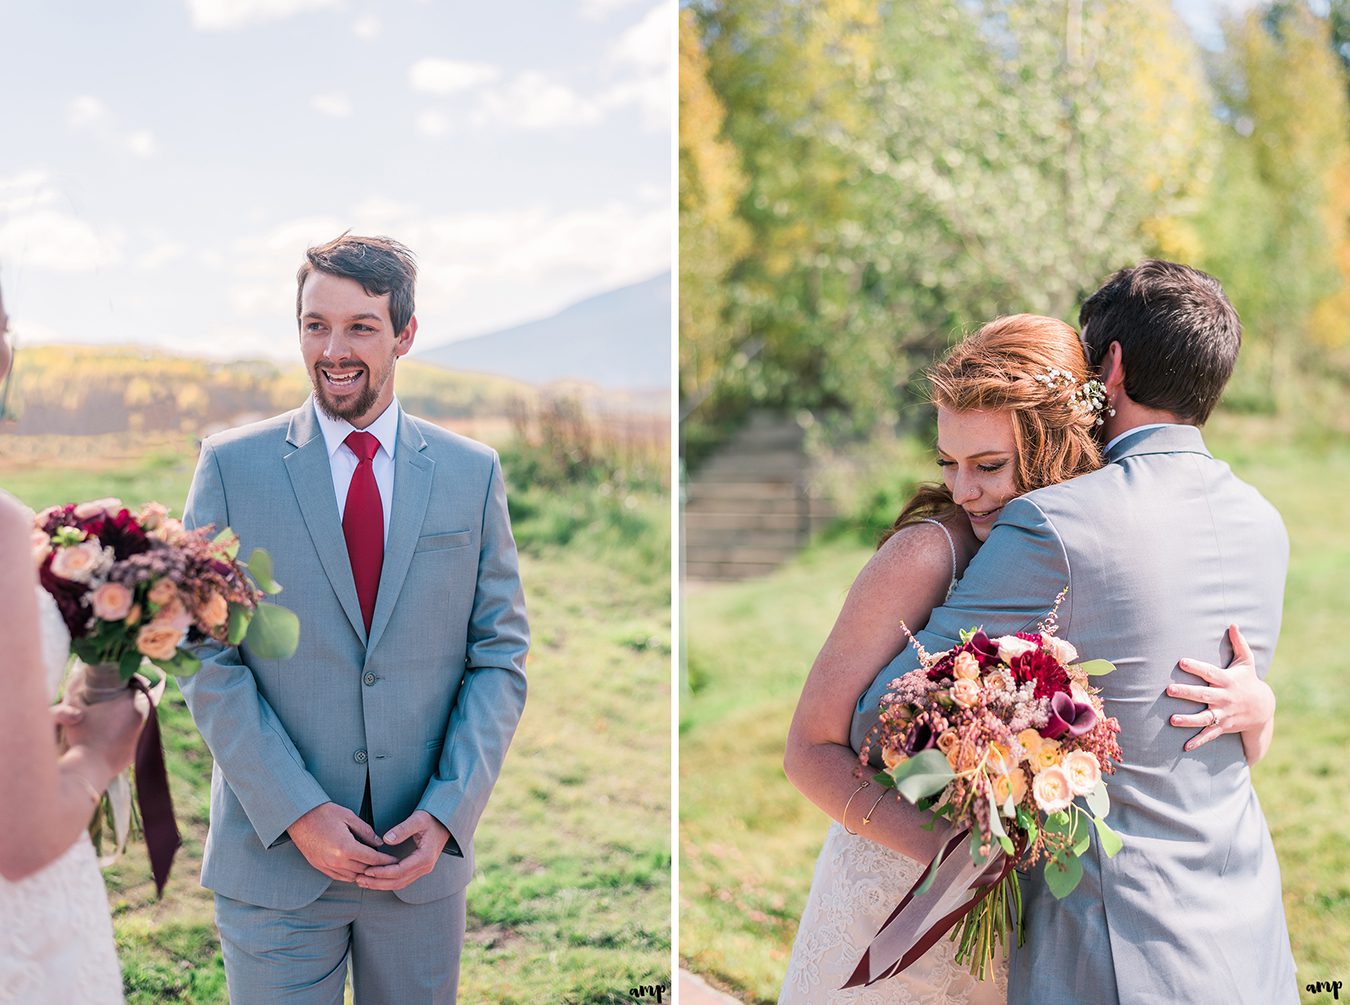 Bride and groom's first look | Fall Wedding in Crested Butte at the Mountain Wedding Garden | amanda.matilda.photography